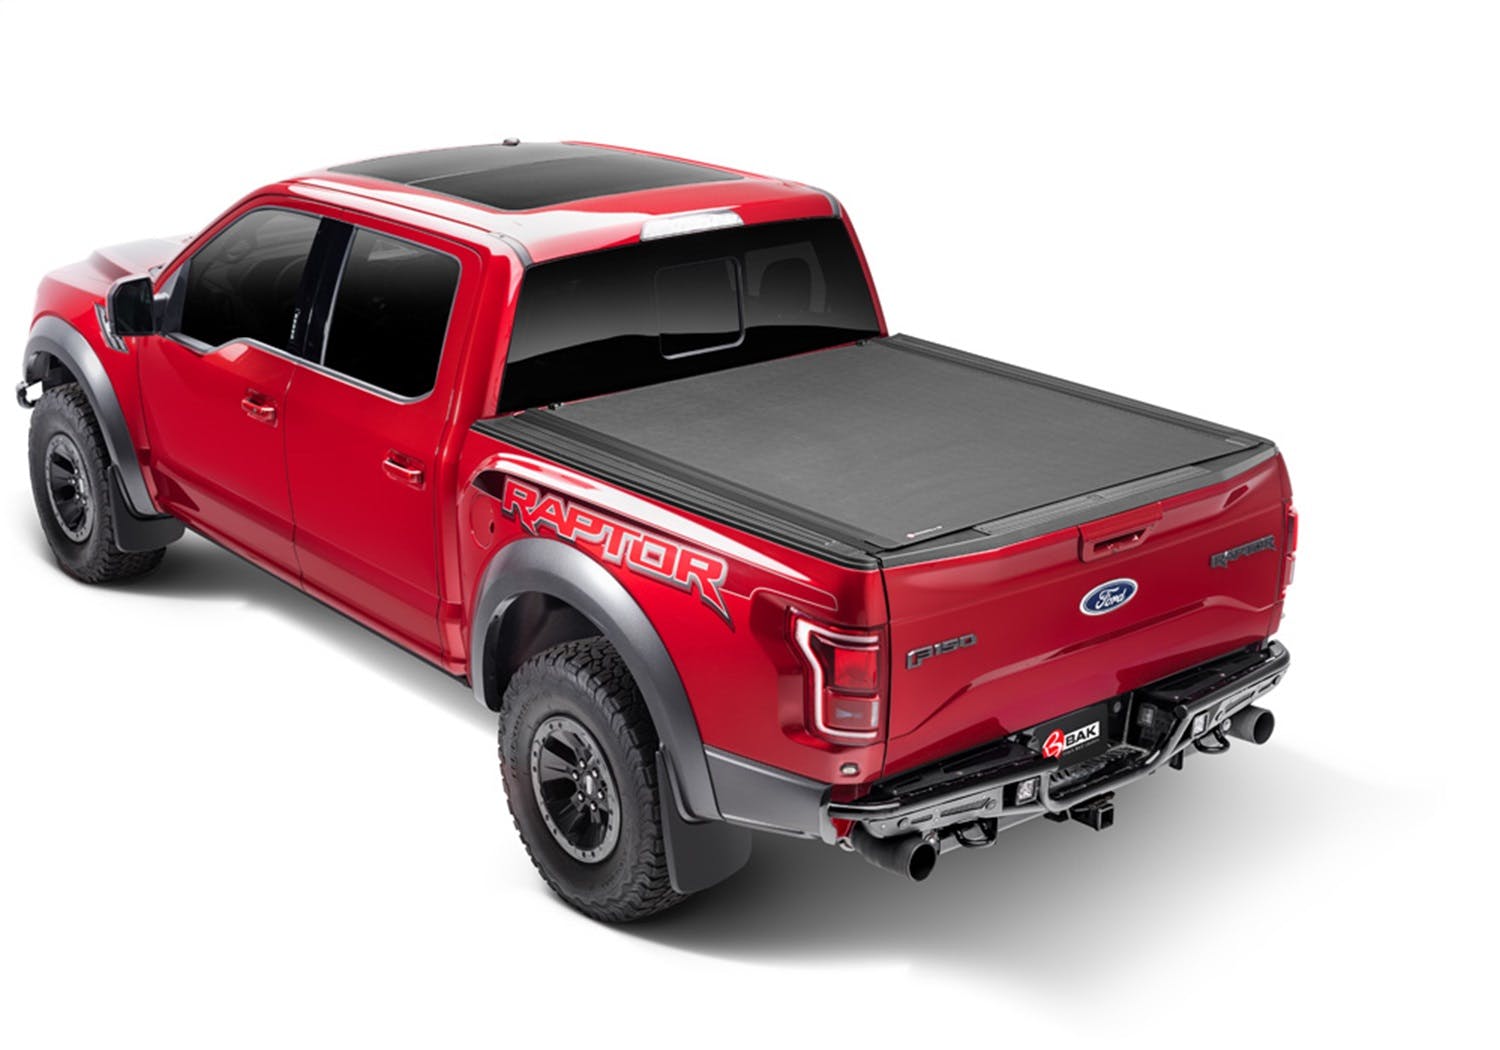 BAK Industries 80327 Revolver X4s Hard Rolling Truck Bed Cover